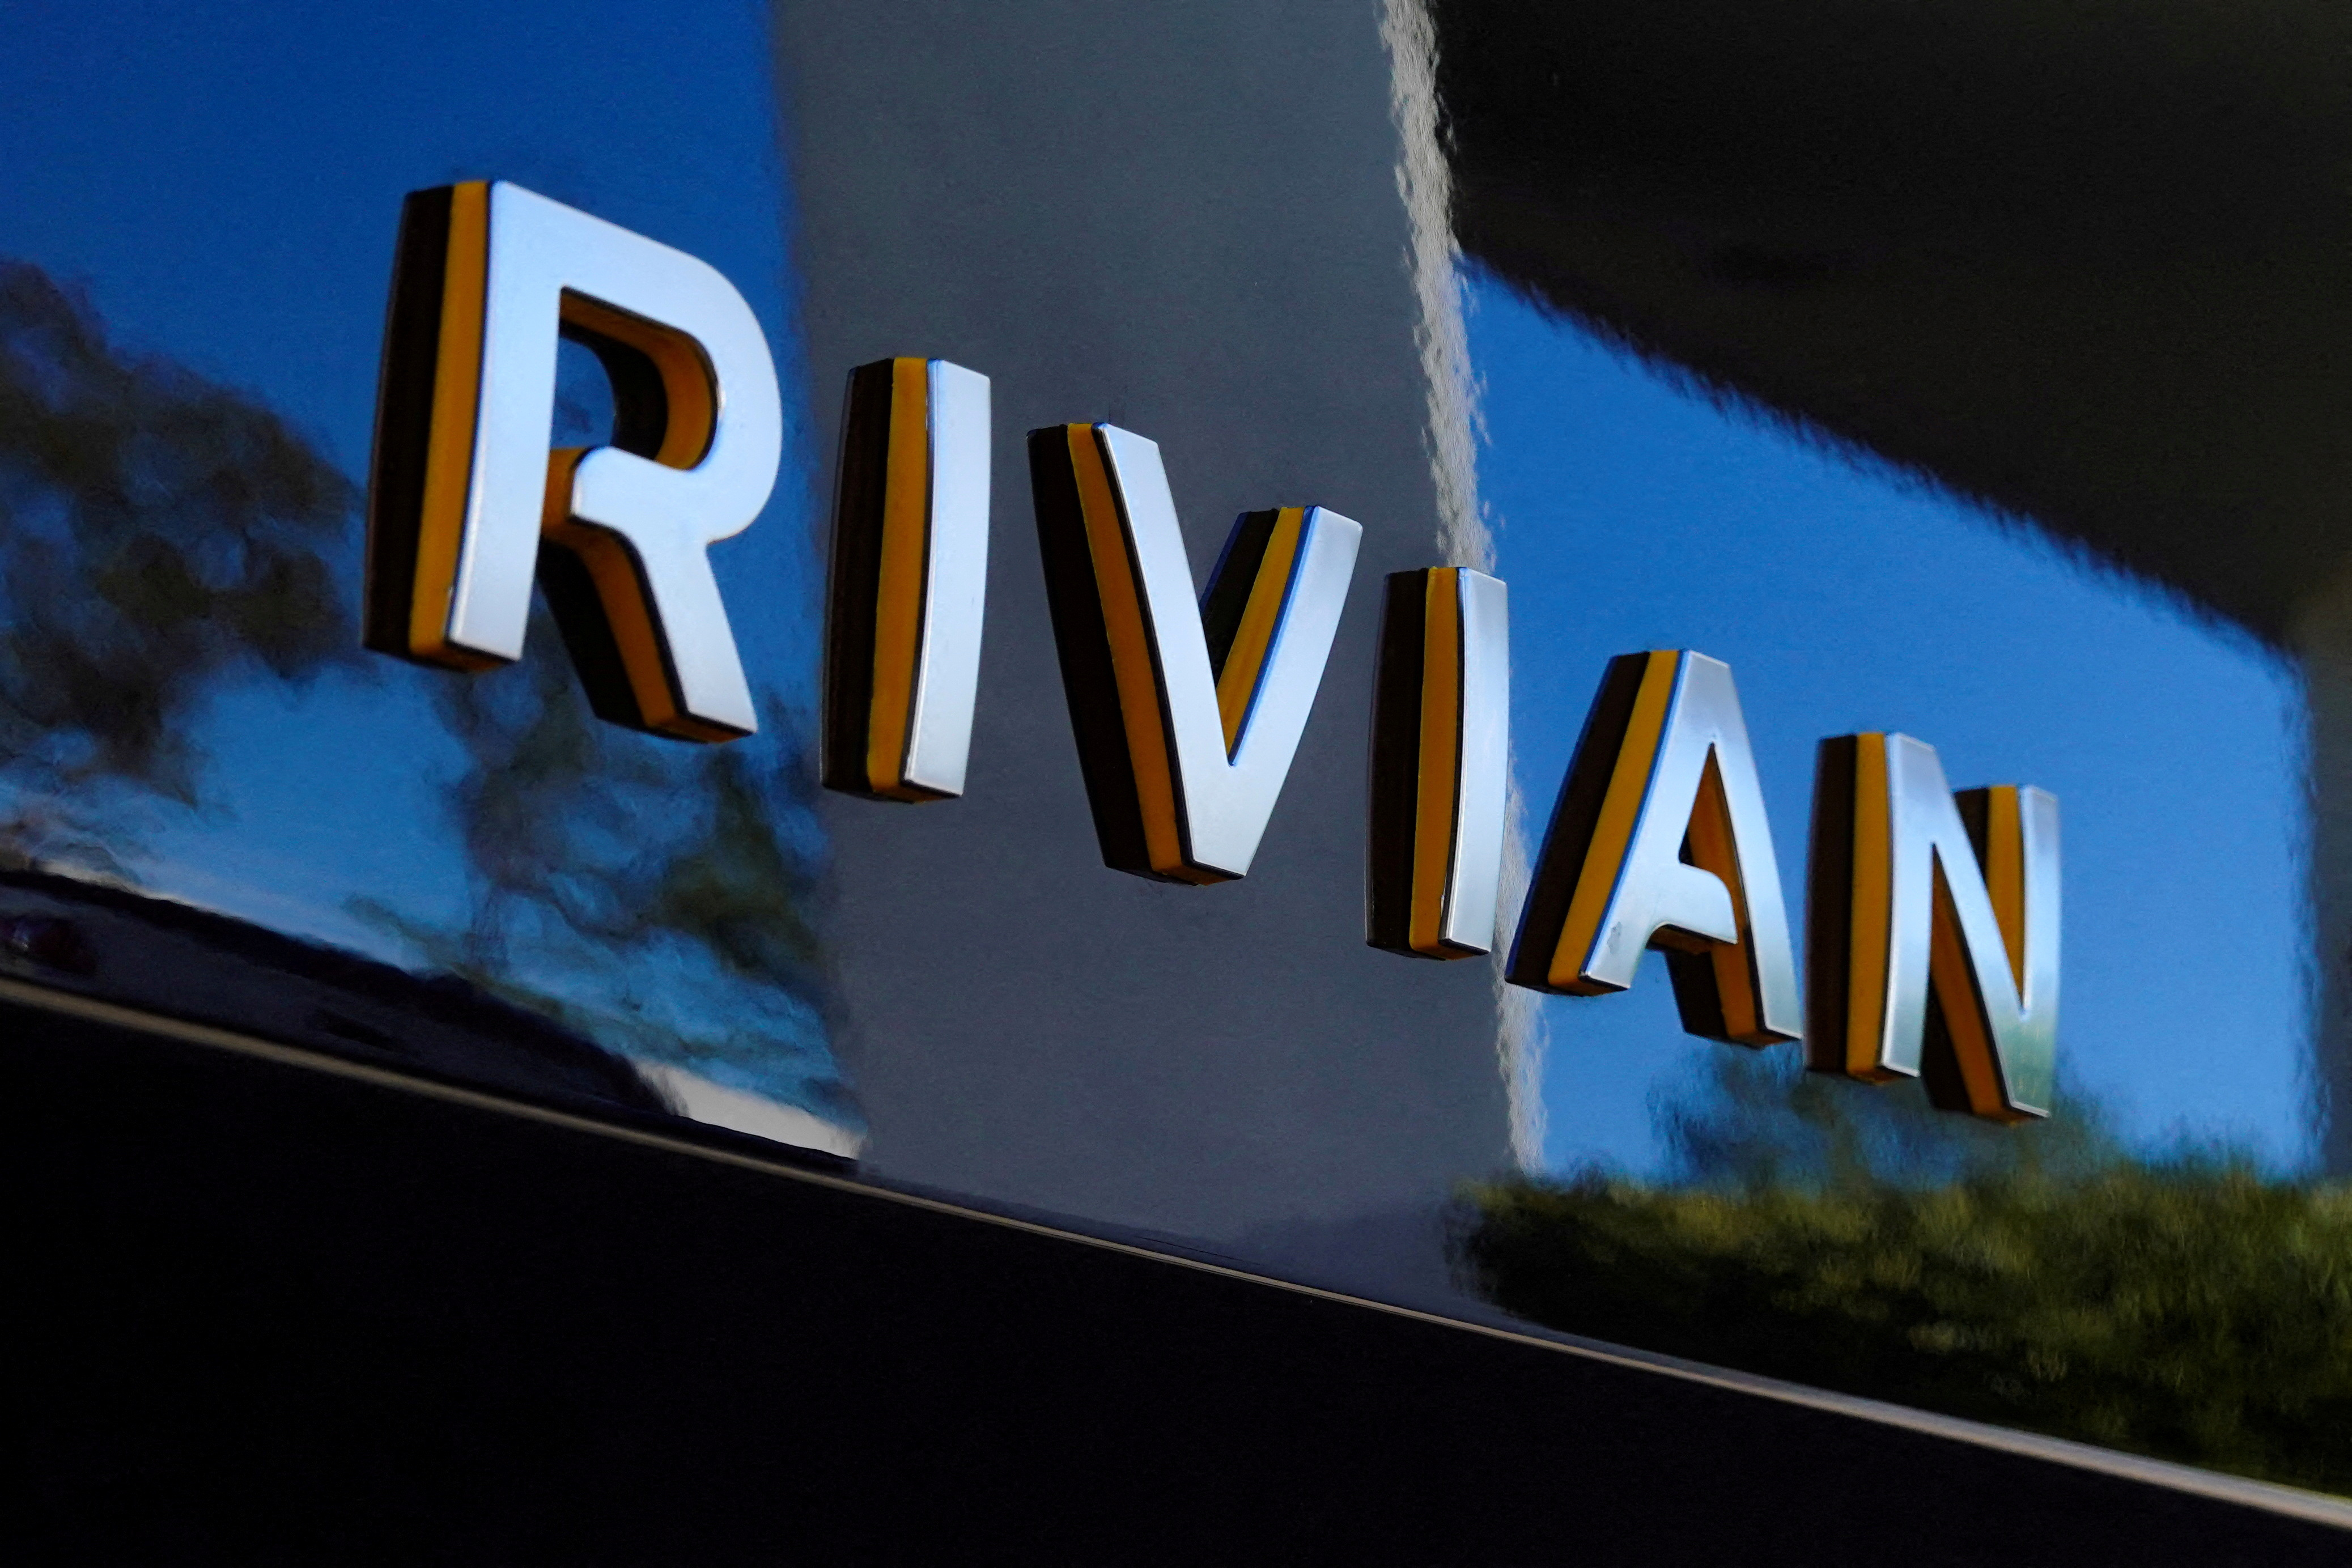 The Rivian name is shown on one of their new electic SUV vehicles in California